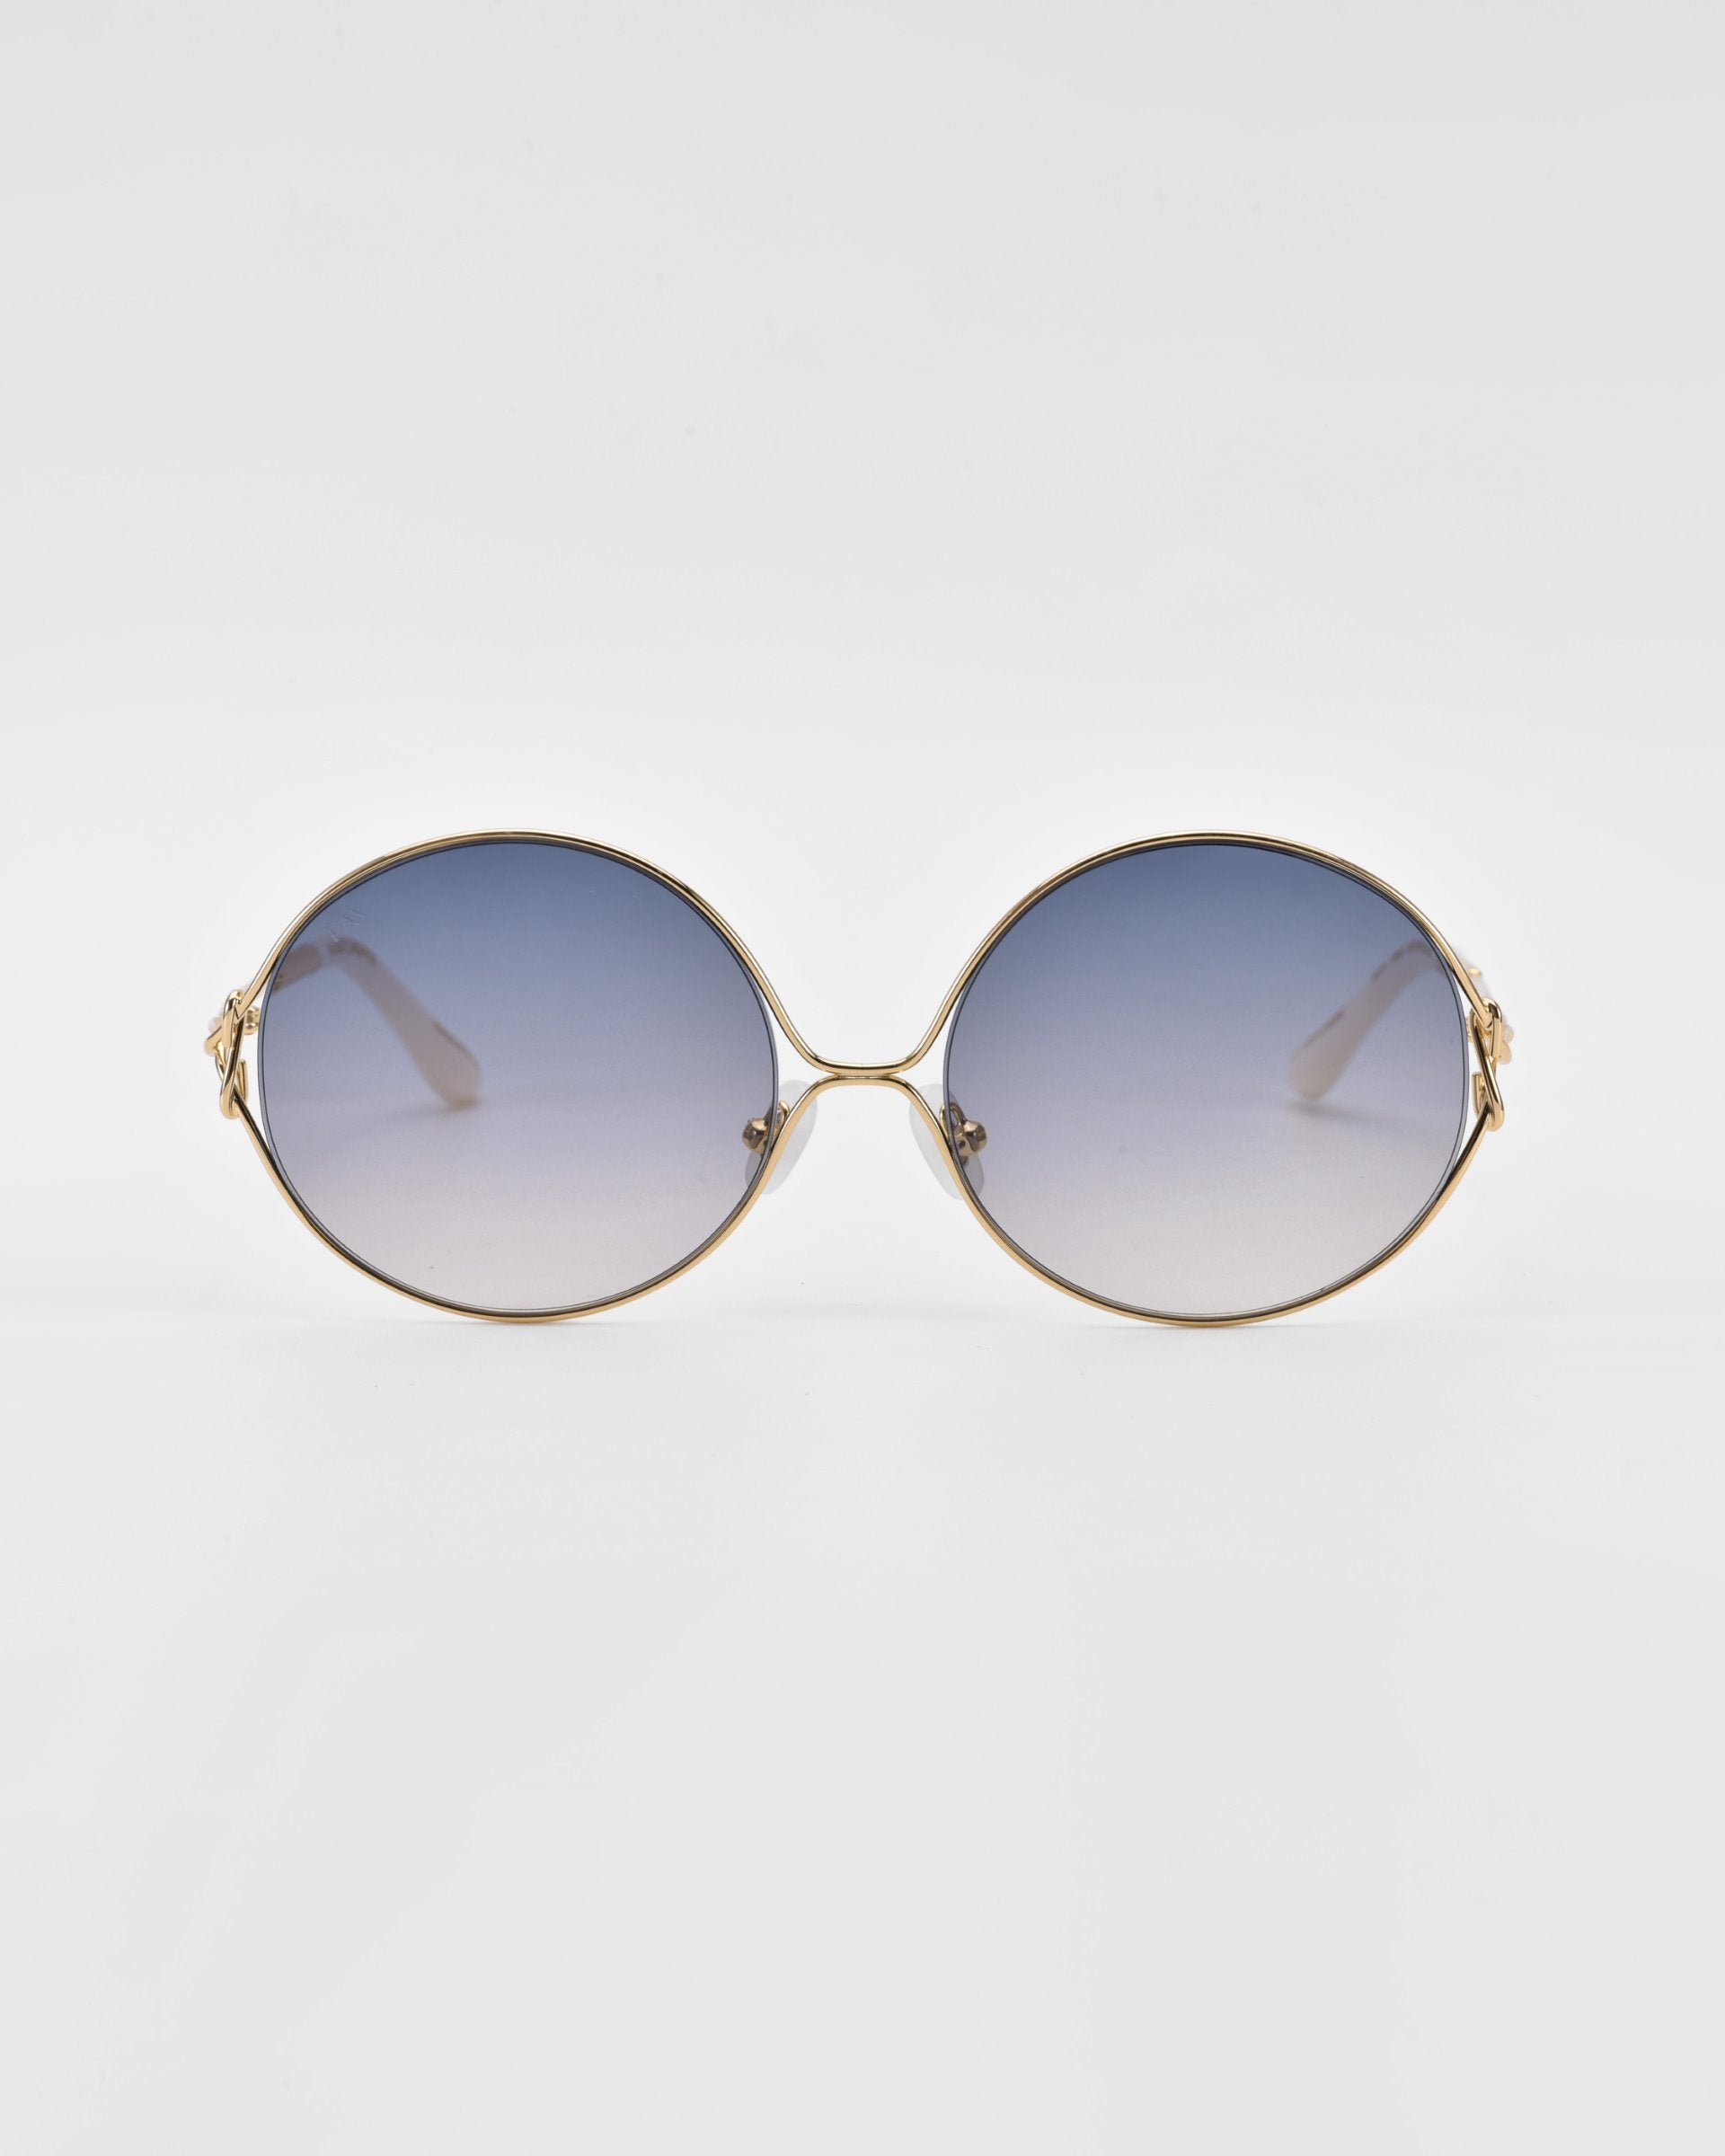 A pair of stylish retro-inspired sunglasses featuring oversized round frames and gradient tinted lenses. The lenses transition from dark blue at the top to a lighter shade towards the bottom. The backdrop is minimal and white. The product name is Aura and it is by For Art&#39;s Sake®.